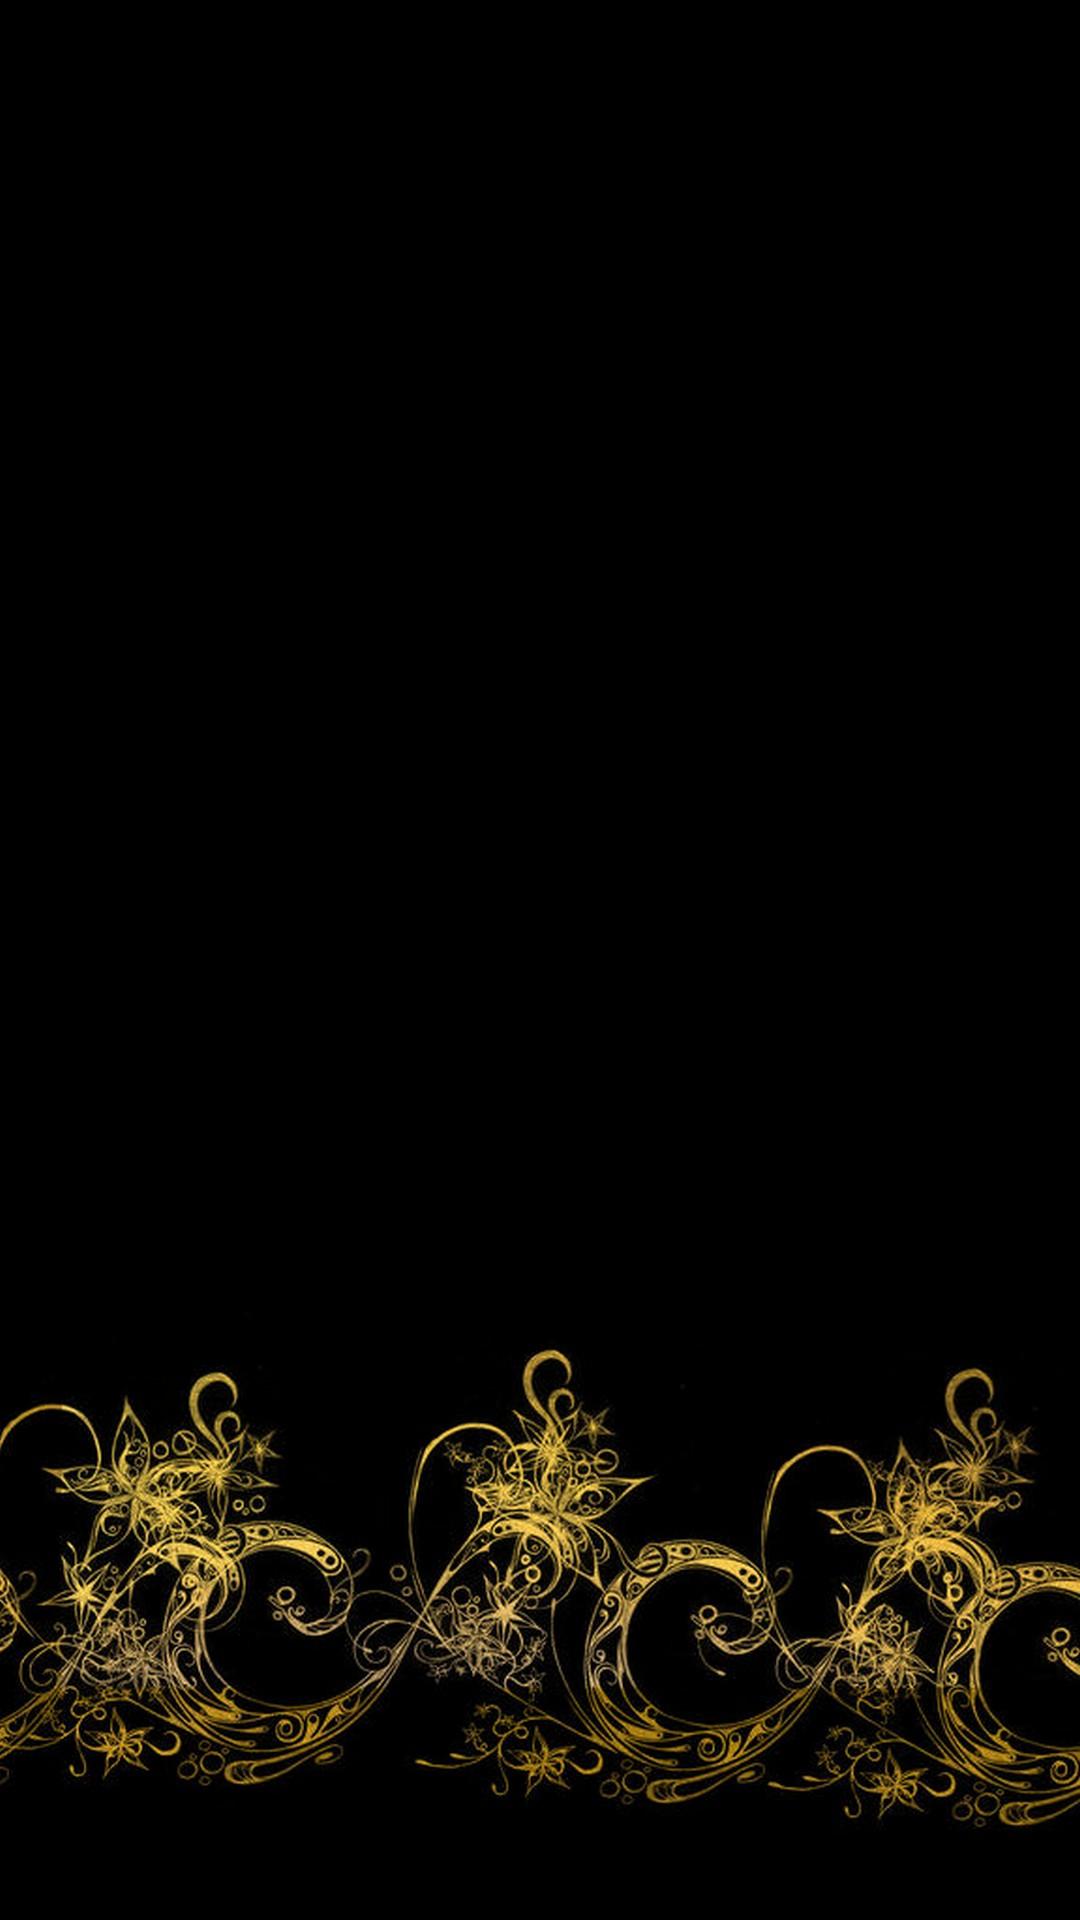 Wallpaper Android Black and Gold Android Wallpaper